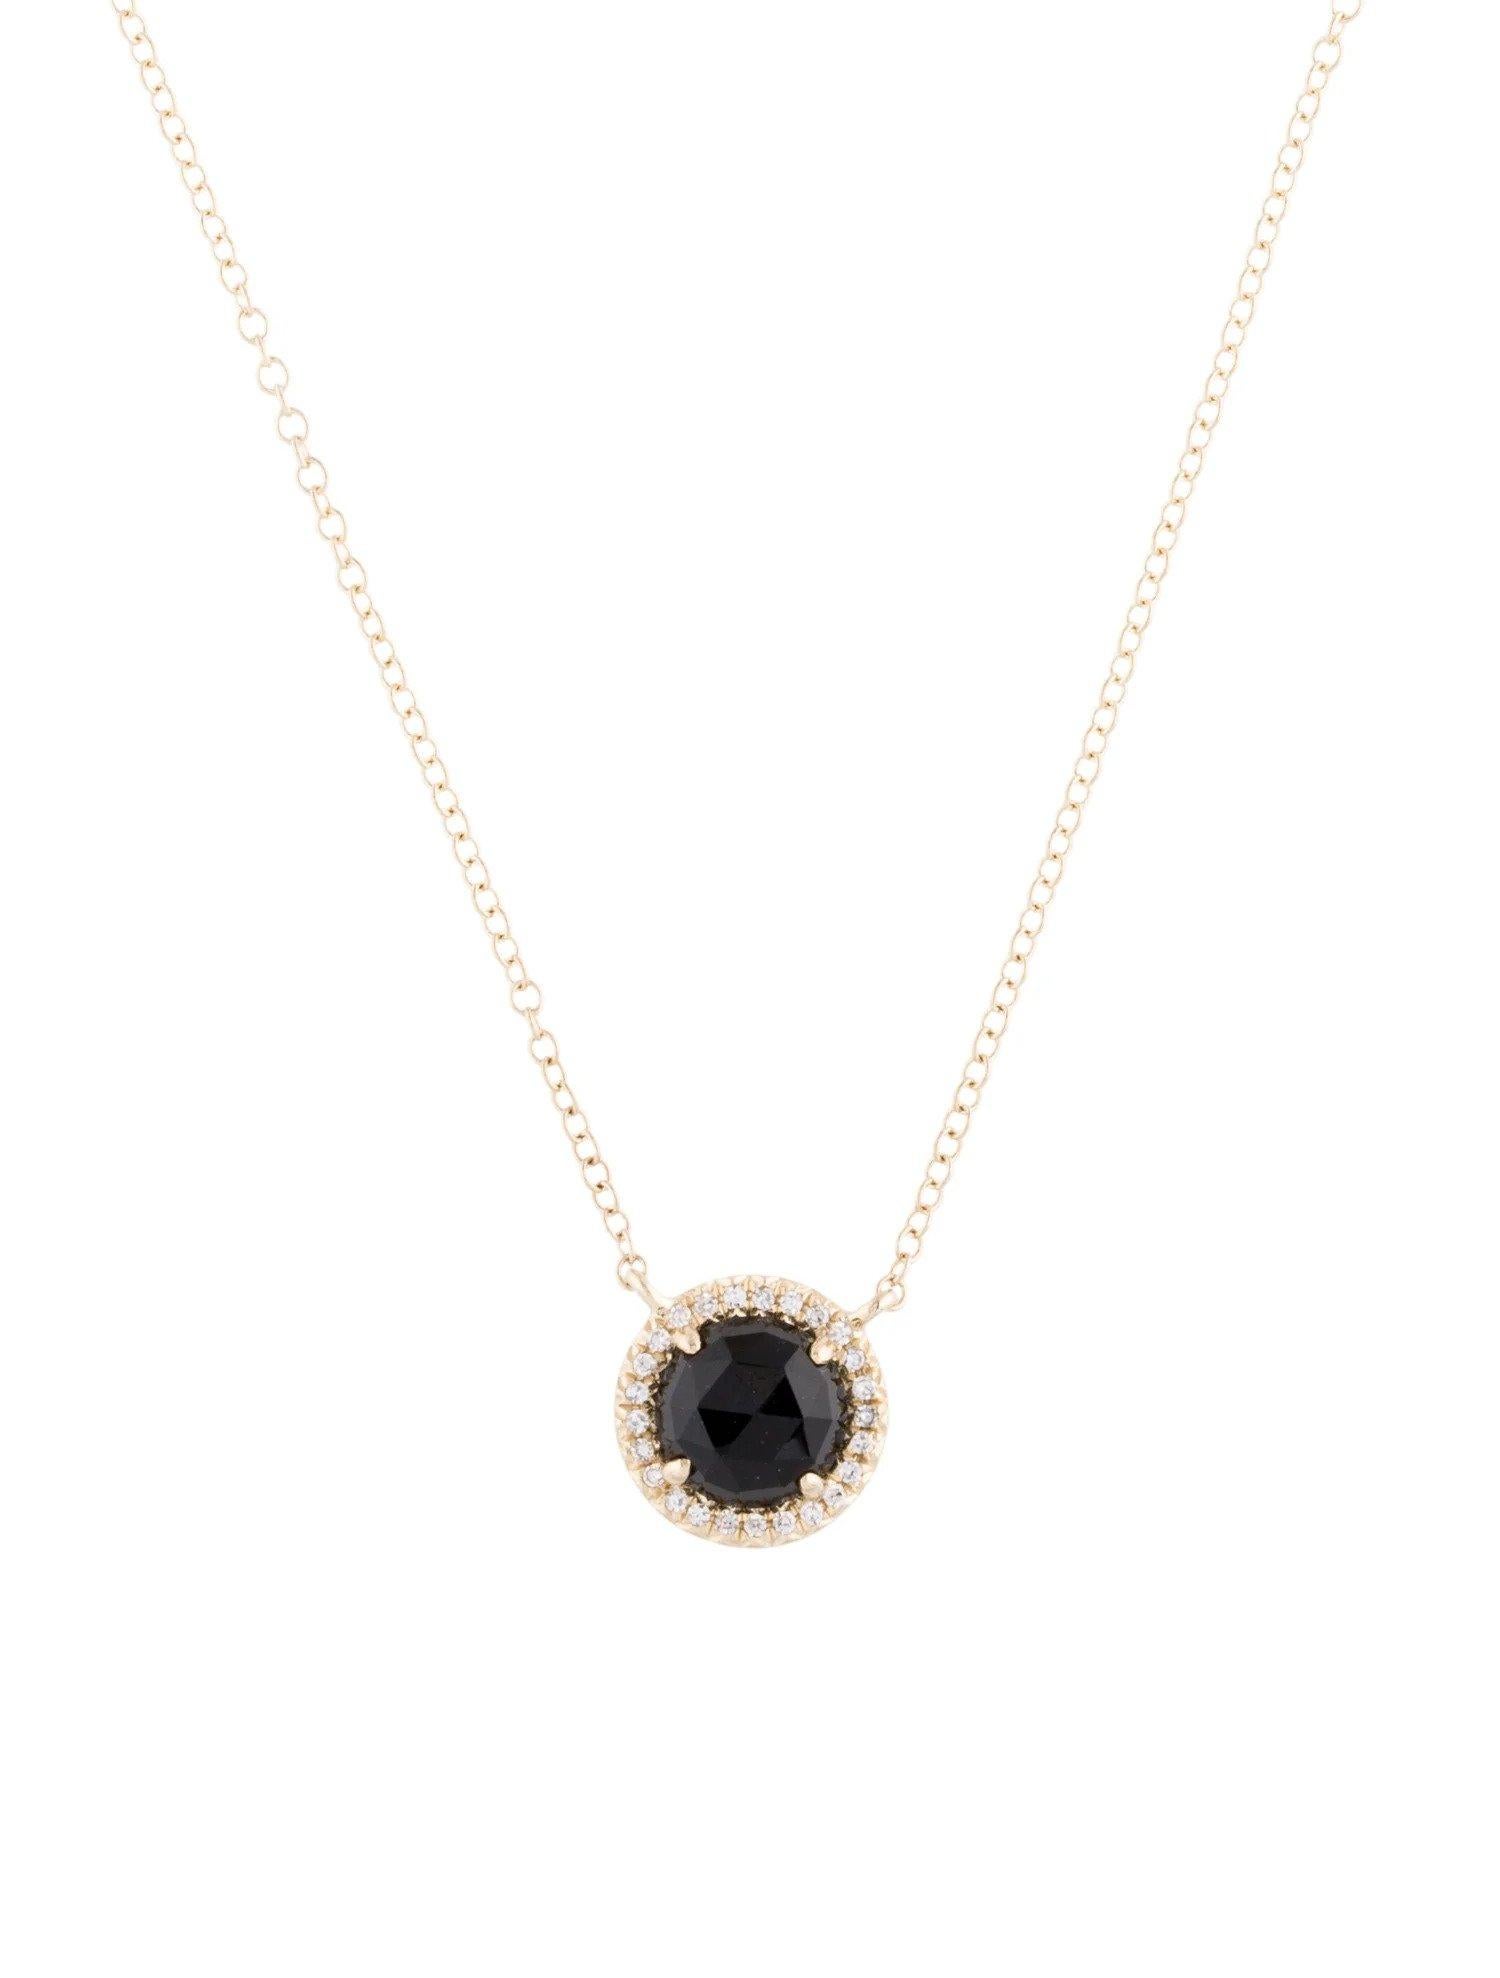 This Black Onyx & Diamond Pendant is a stunning and timeless accessory that can add a touch of glamour and sophistication to any outfit. 

This pendant features a 1.00 Carat Round Black Onyx, with a Diamond Halo comprised of 0.06 Carats of Single